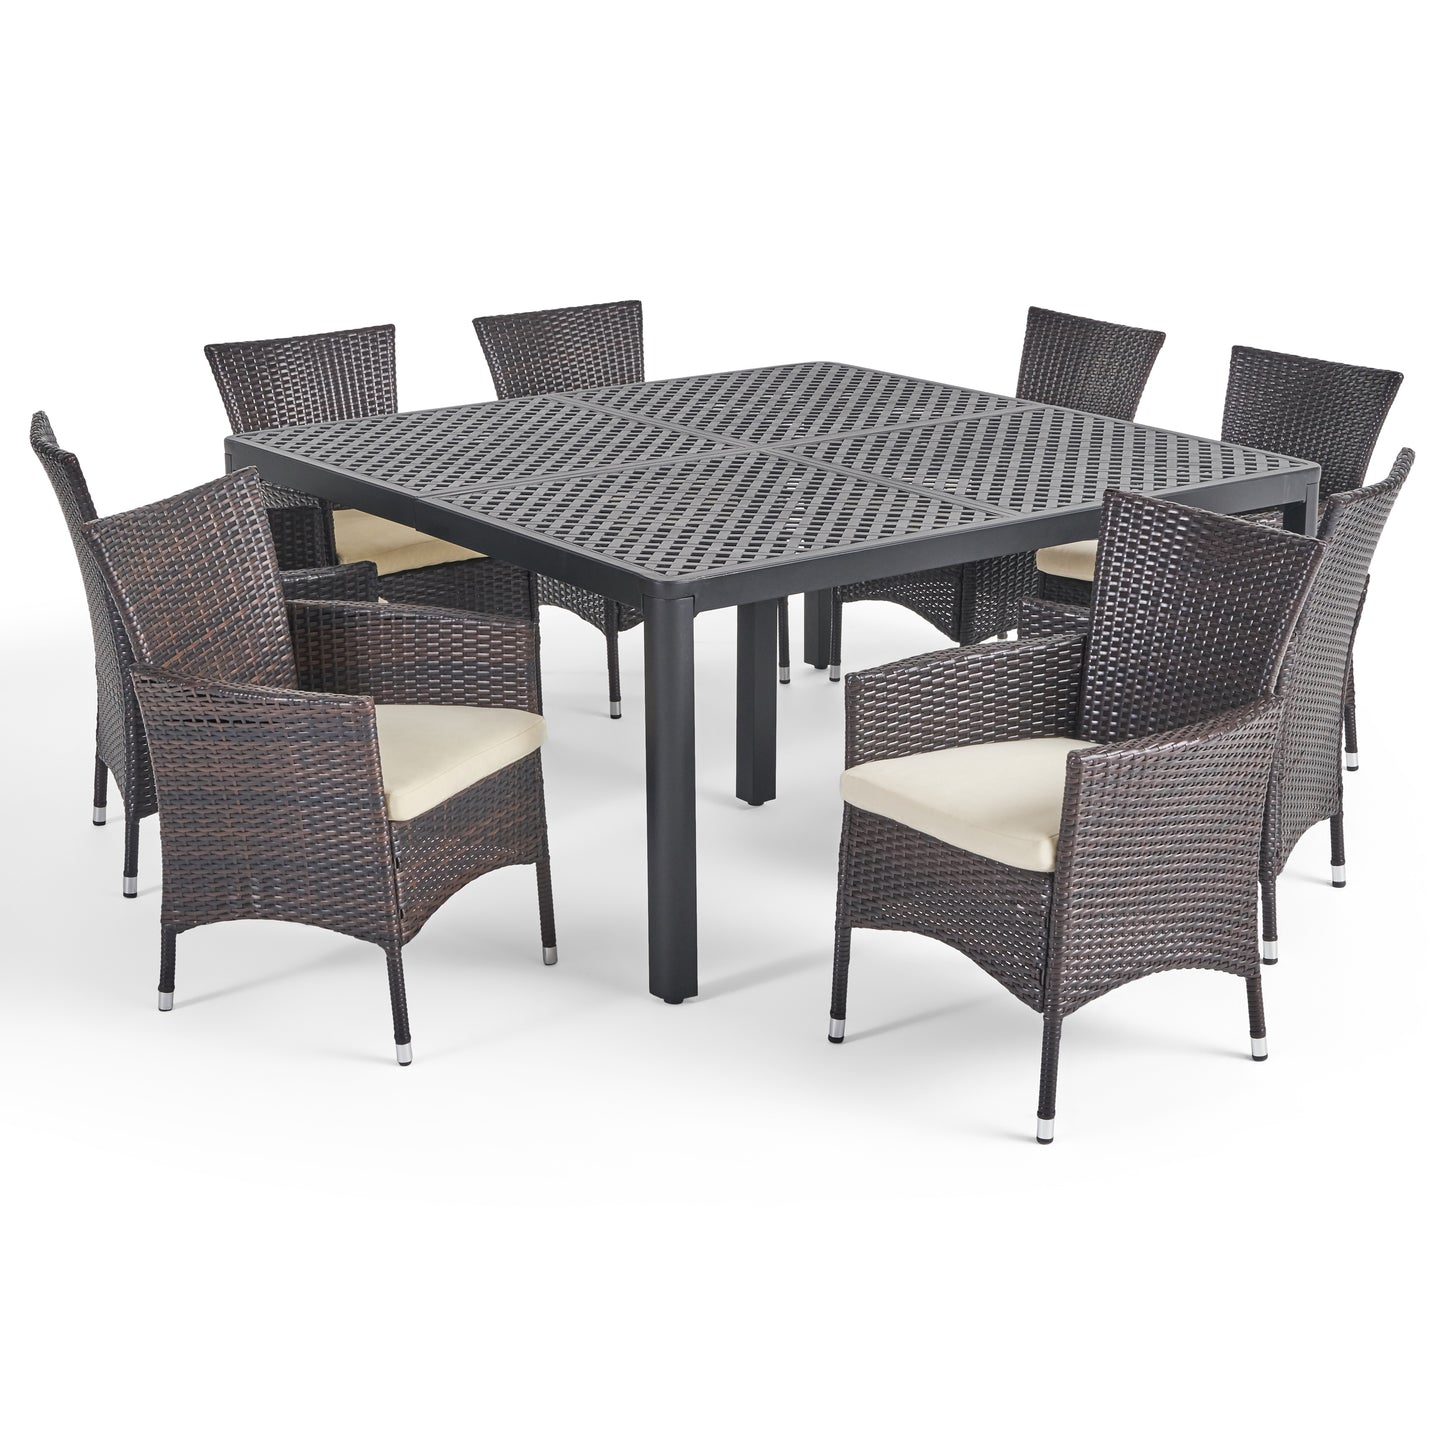 Nelly Outdoor Aluminum and Wicker 8 Seater Dining Set